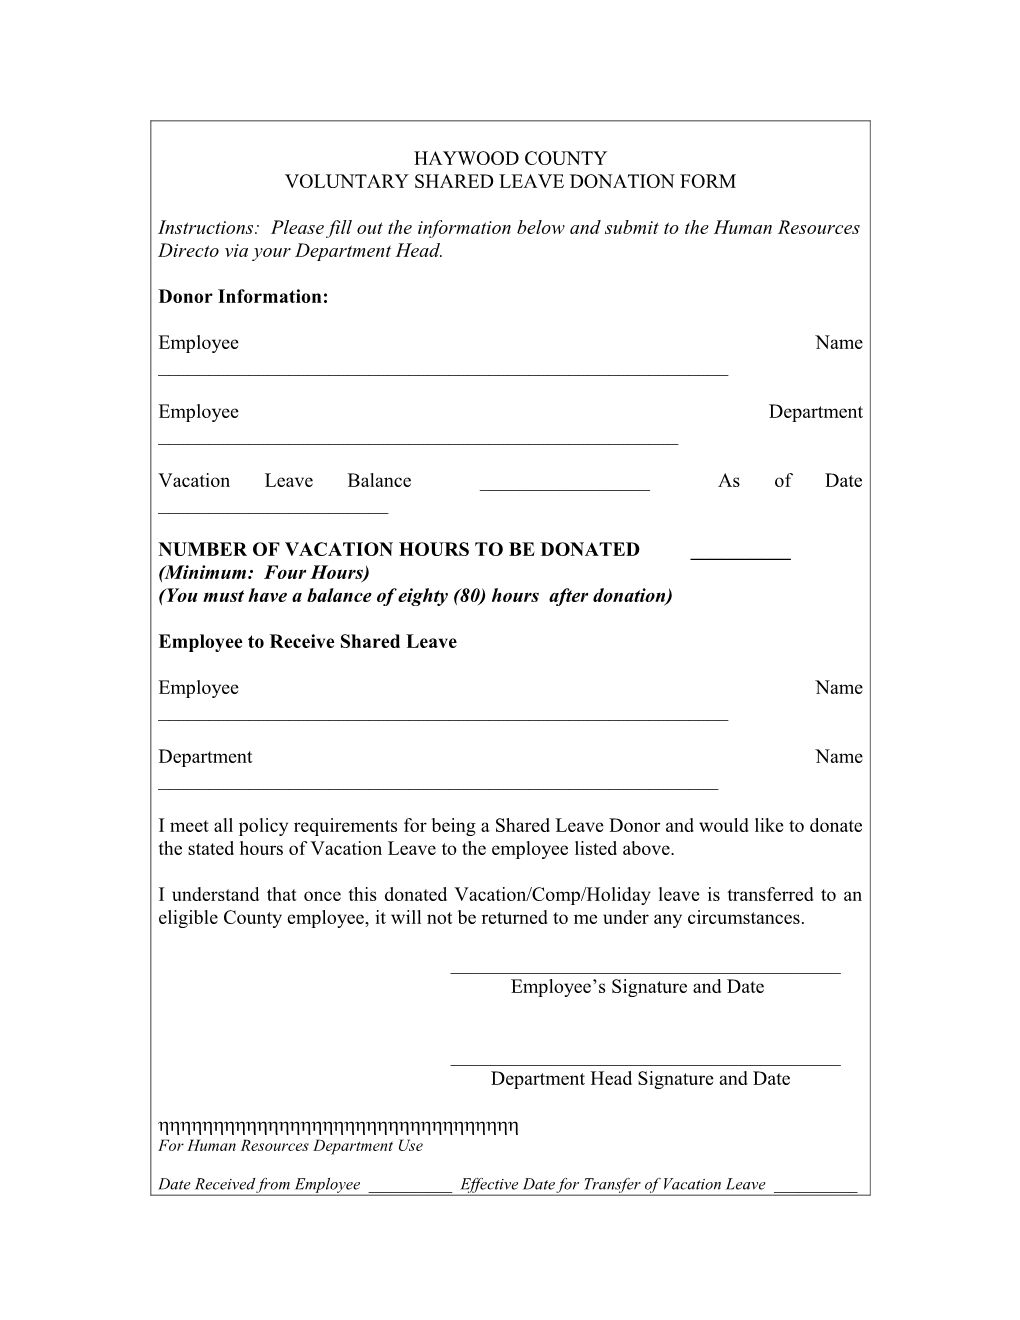 Voluntary Shared Leave Donation Form